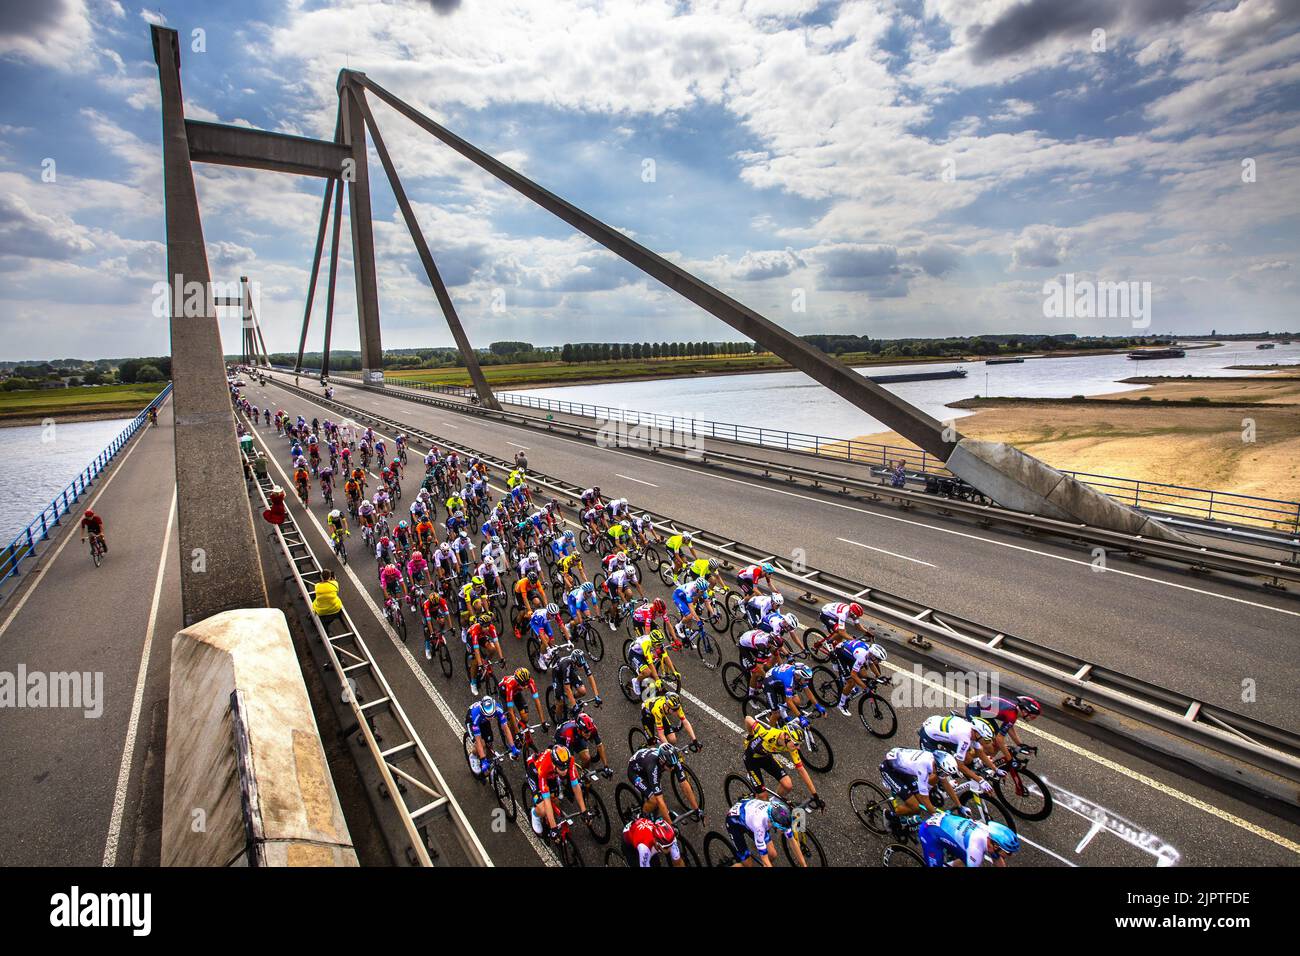 OOIJ - Atmospheric image of the peloton that passes the Waal over the Prince Willem Alexander Bridge near Ooij during the second stage of the Tour of Spain (Vuelta a Espana). The second stage of the Vuelta goes from Den Bosch to Utrecht. ANP VINCENT JANNINK Stock Photo